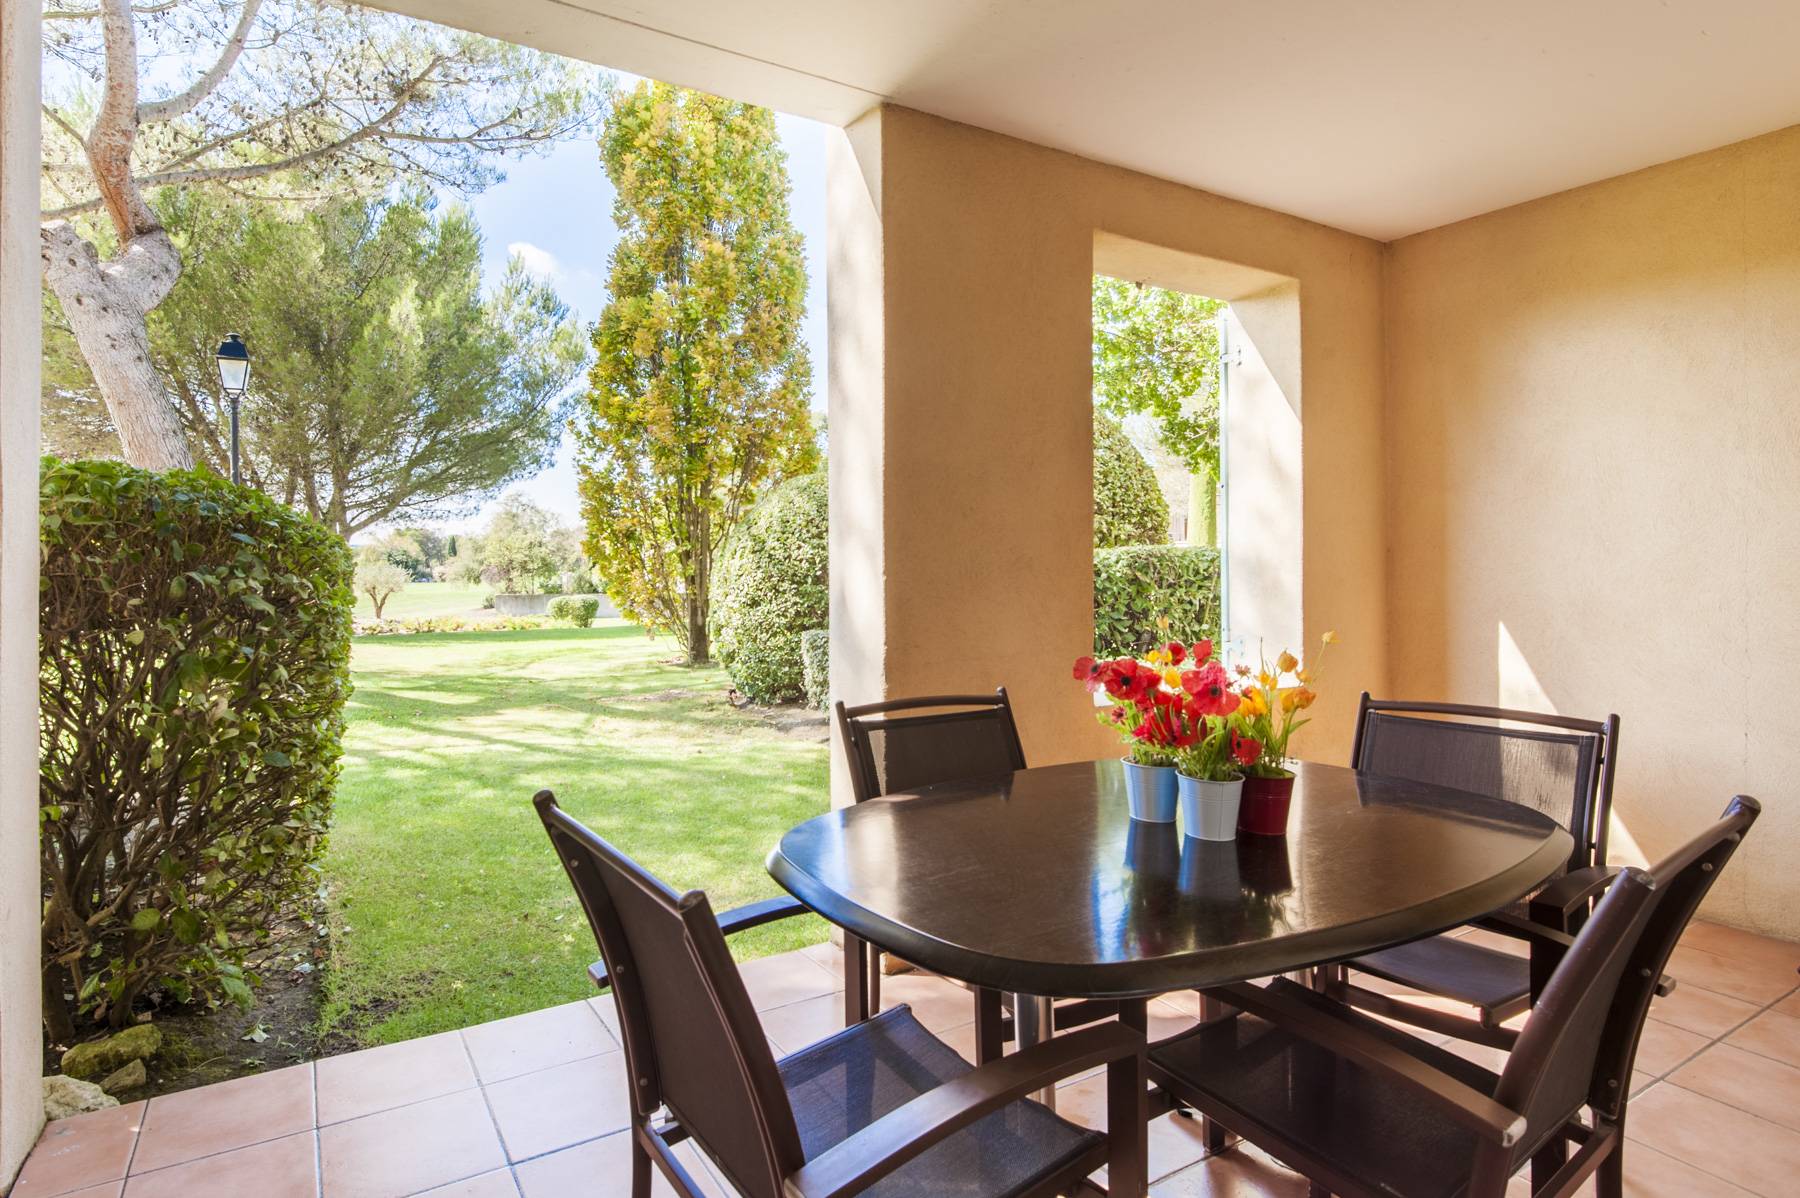 Apartment1 bedroom in Pont  Royal Golf Resort, in Provence